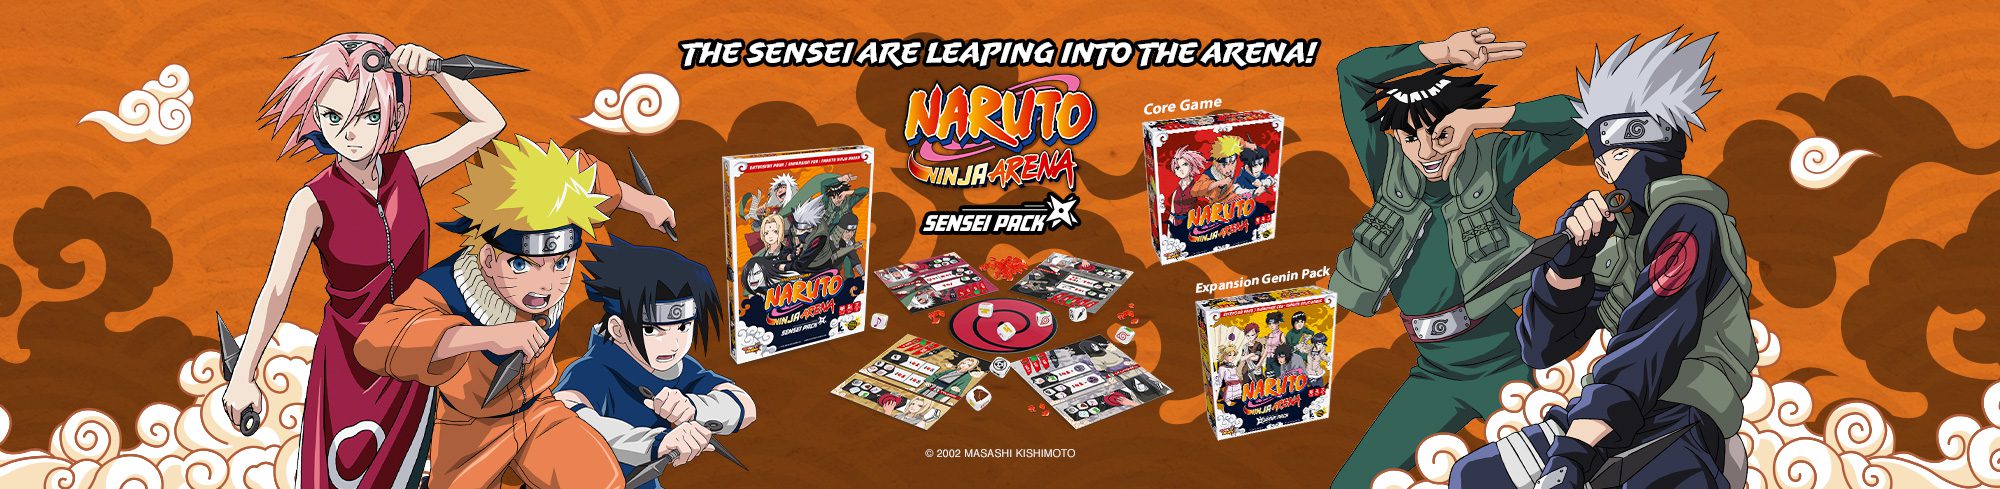 Help with an online game. (Naruto Arena) - Help - GameGuardian